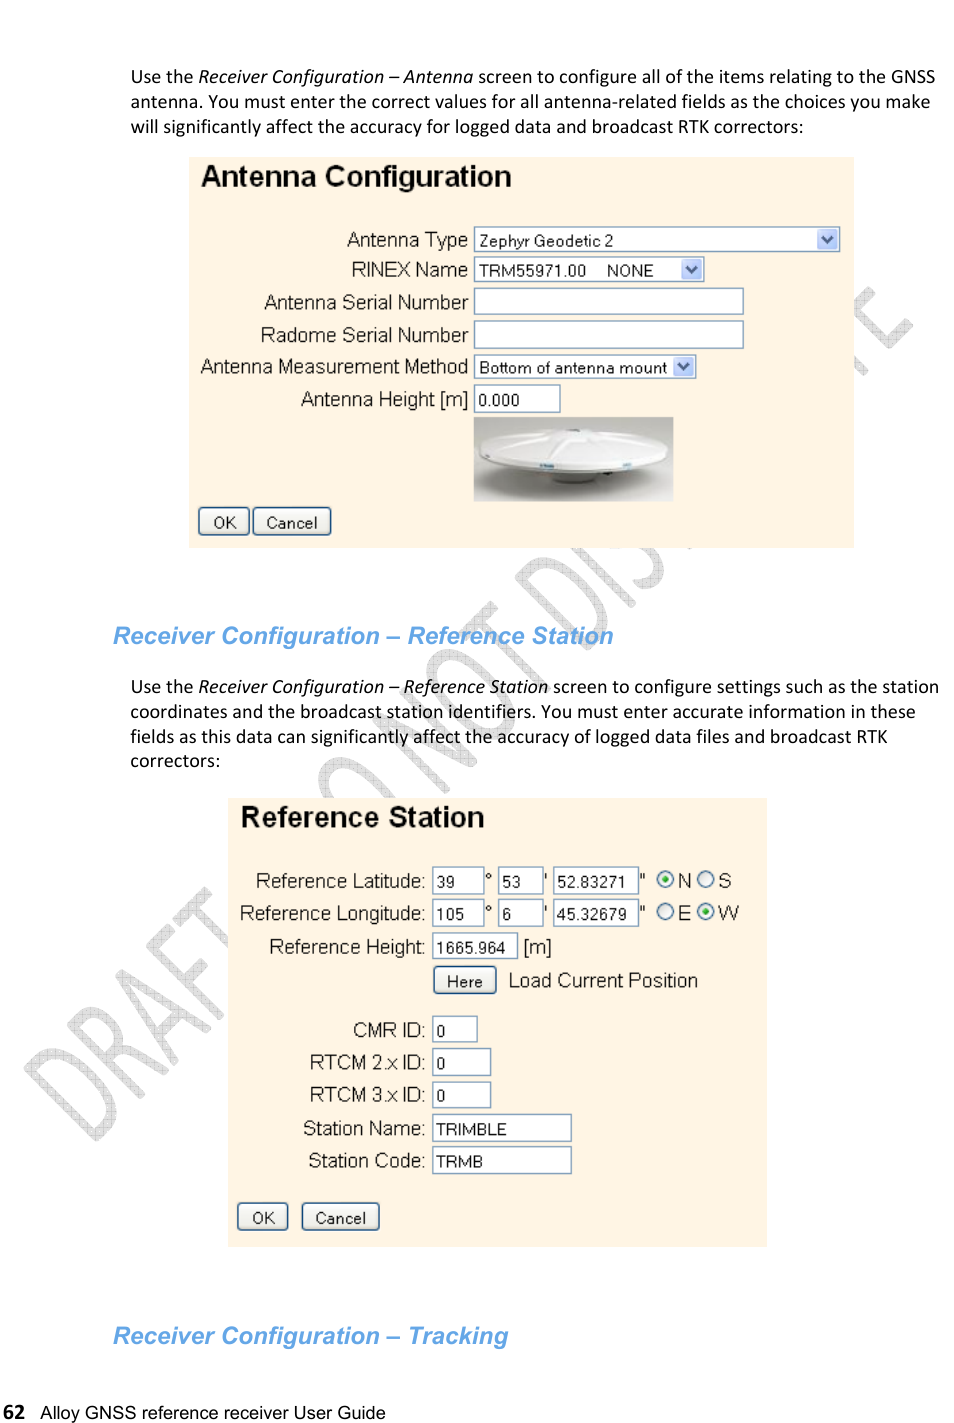   62   Alloy GNSS reference receiver User Guide  Use the Receiver Configuration – Antenna screen to configure all of the items relating to the GNSS antenna. You must enter the correct values for all antenna-related fields as the choices you make will significantly affect the accuracy for logged data and broadcast RTK correctors:    Receiver Configuration – Reference Station  Use the Receiver Configuration – Reference Station screen to configure settings such as the station coordinates and the broadcast station identifiers. You must enter accurate information in these fields as this data can significantly affect the accuracy of logged data files and broadcast RTK correctors:     Receiver Configuration – Tracking 